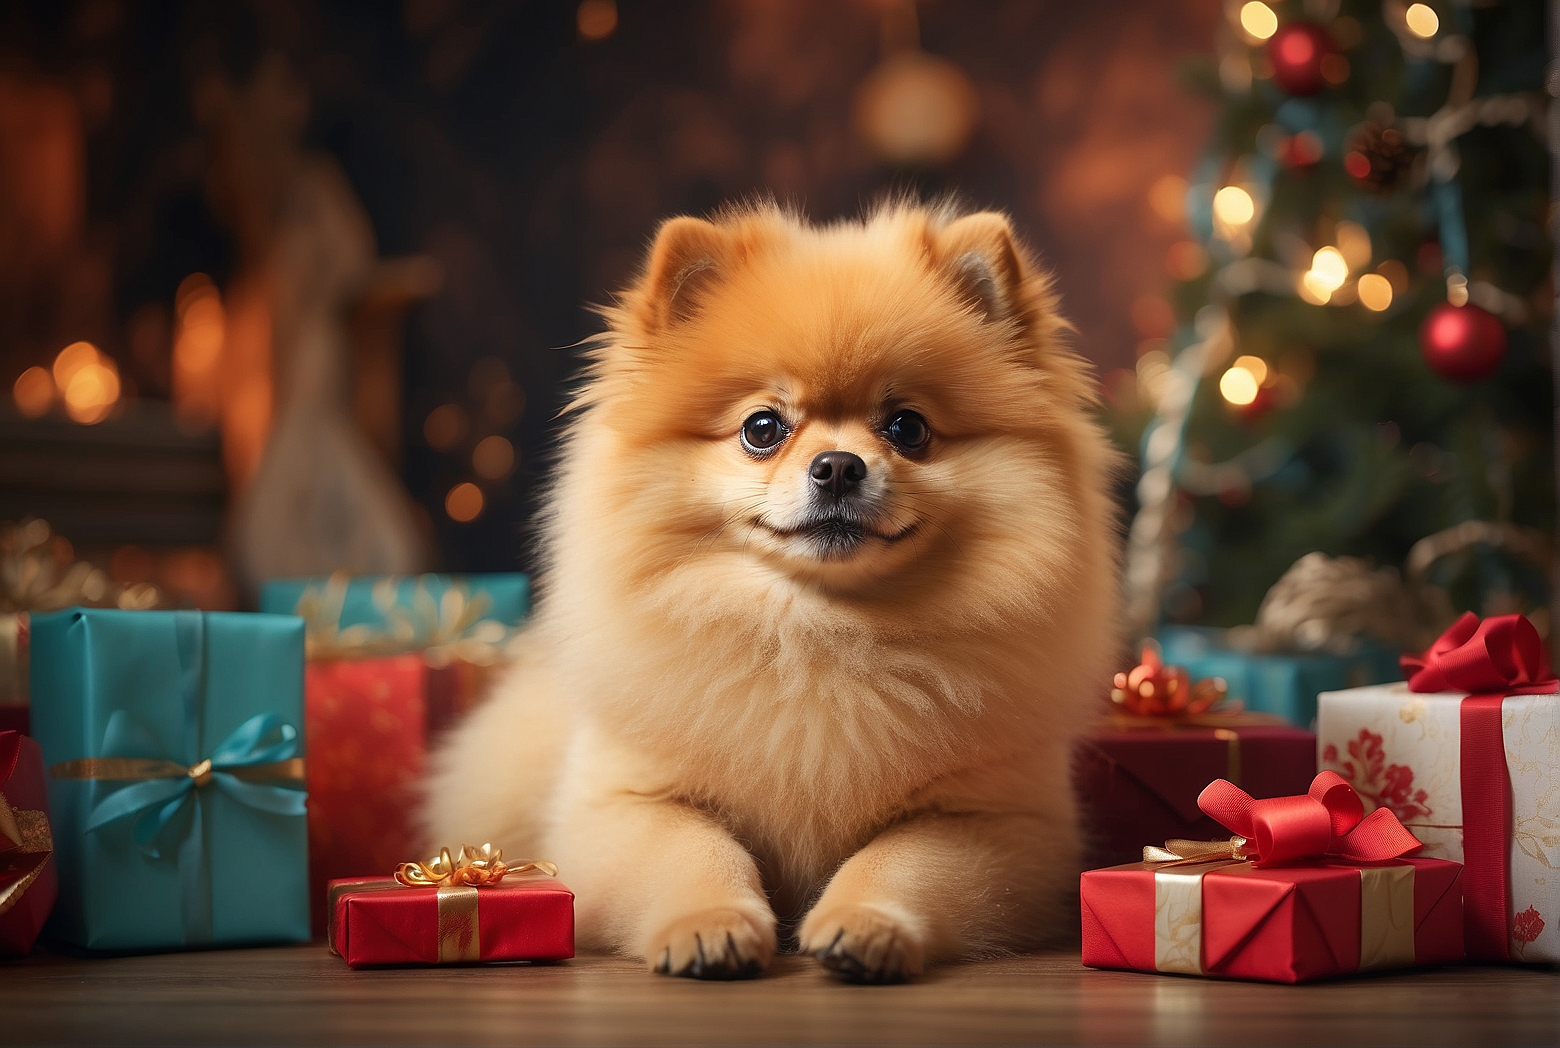 Top gifts for your beloved Pomeranians